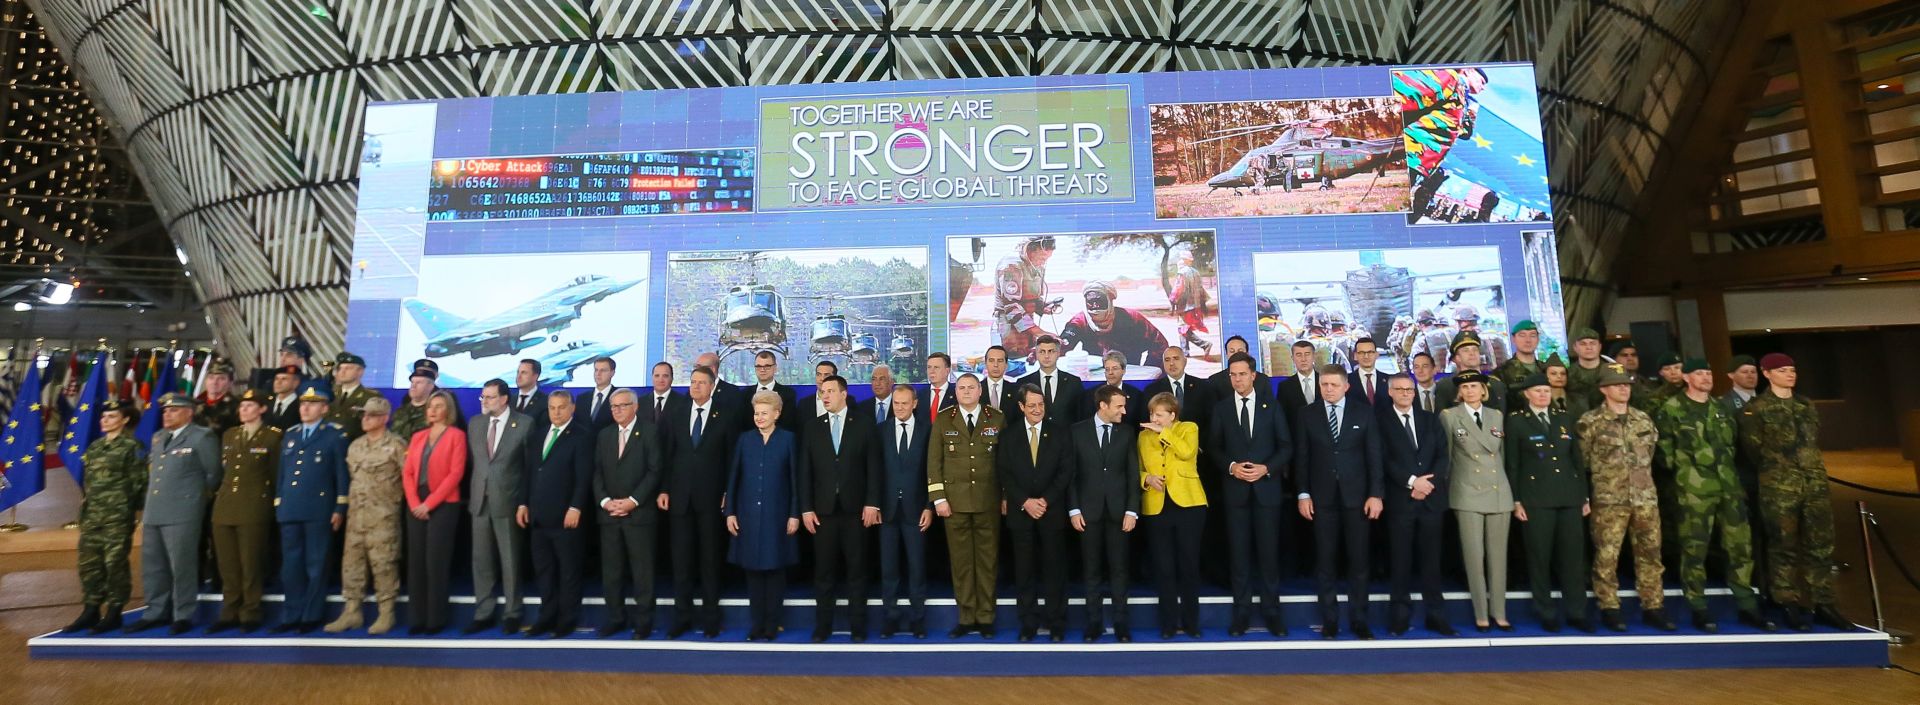 epa06390031 A general view of the family picture of 24 heads of state members of Defense Permanent Structured Cooperation (PESCO), on the side of the European Council meeting in Brussels in Brussels, Belgium, 14 December 2017. EU leaders gather to discuss the most compelling matters in terms of migration, defense foreign affairs, education, culture, social issues and 'Brexit' negotiations.  EPA/STEPHANIE LECOCQ